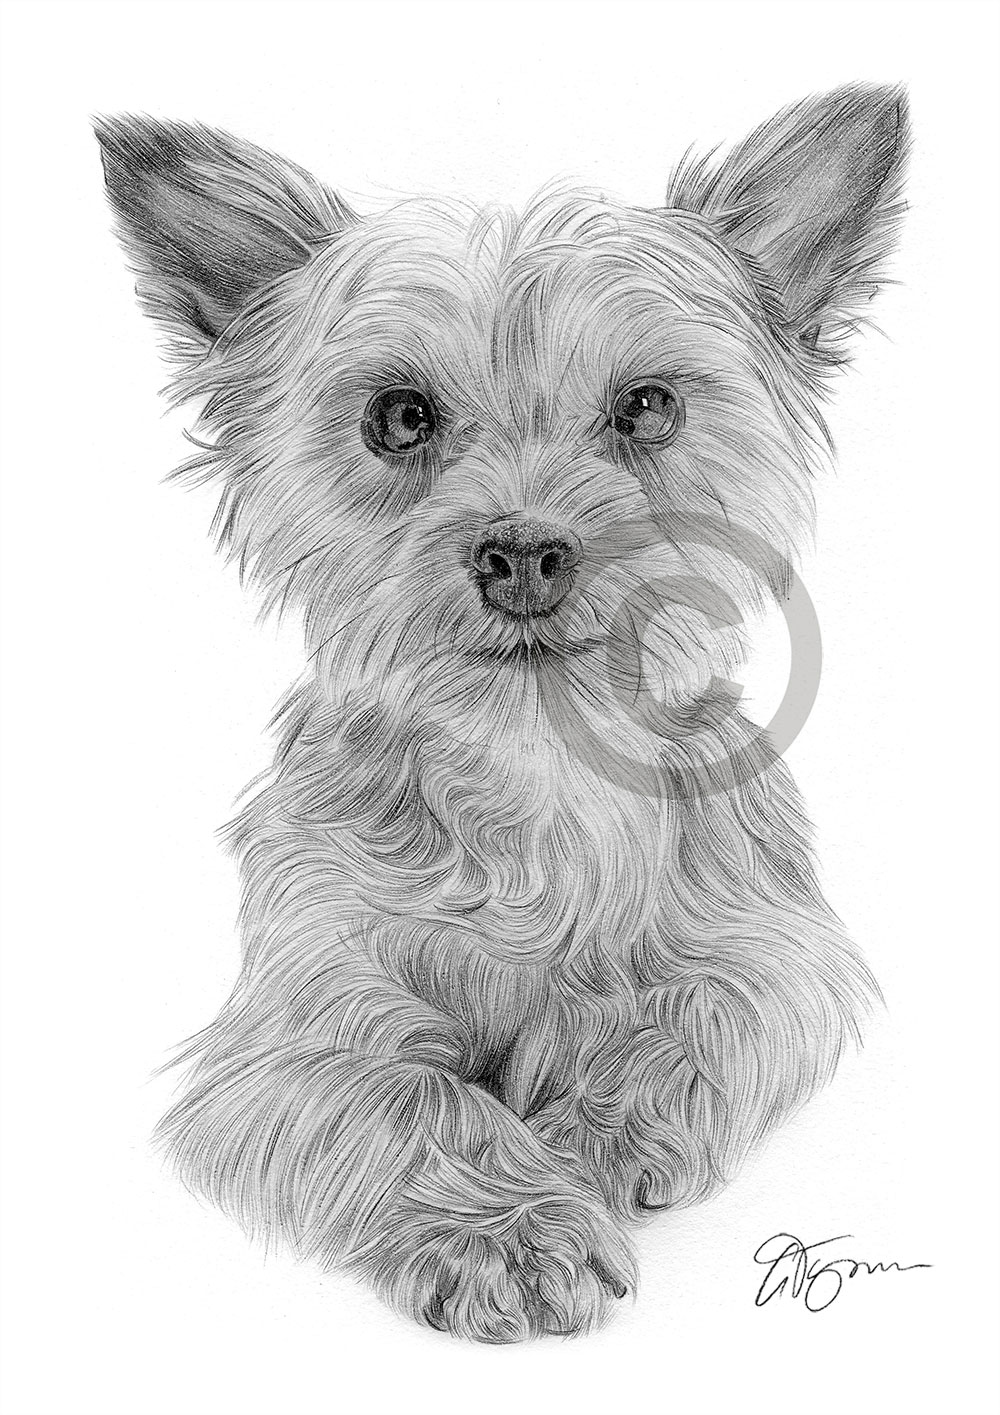 Pencil drawing of a Yorkshire Terrier puppy by artist Gary Tymon